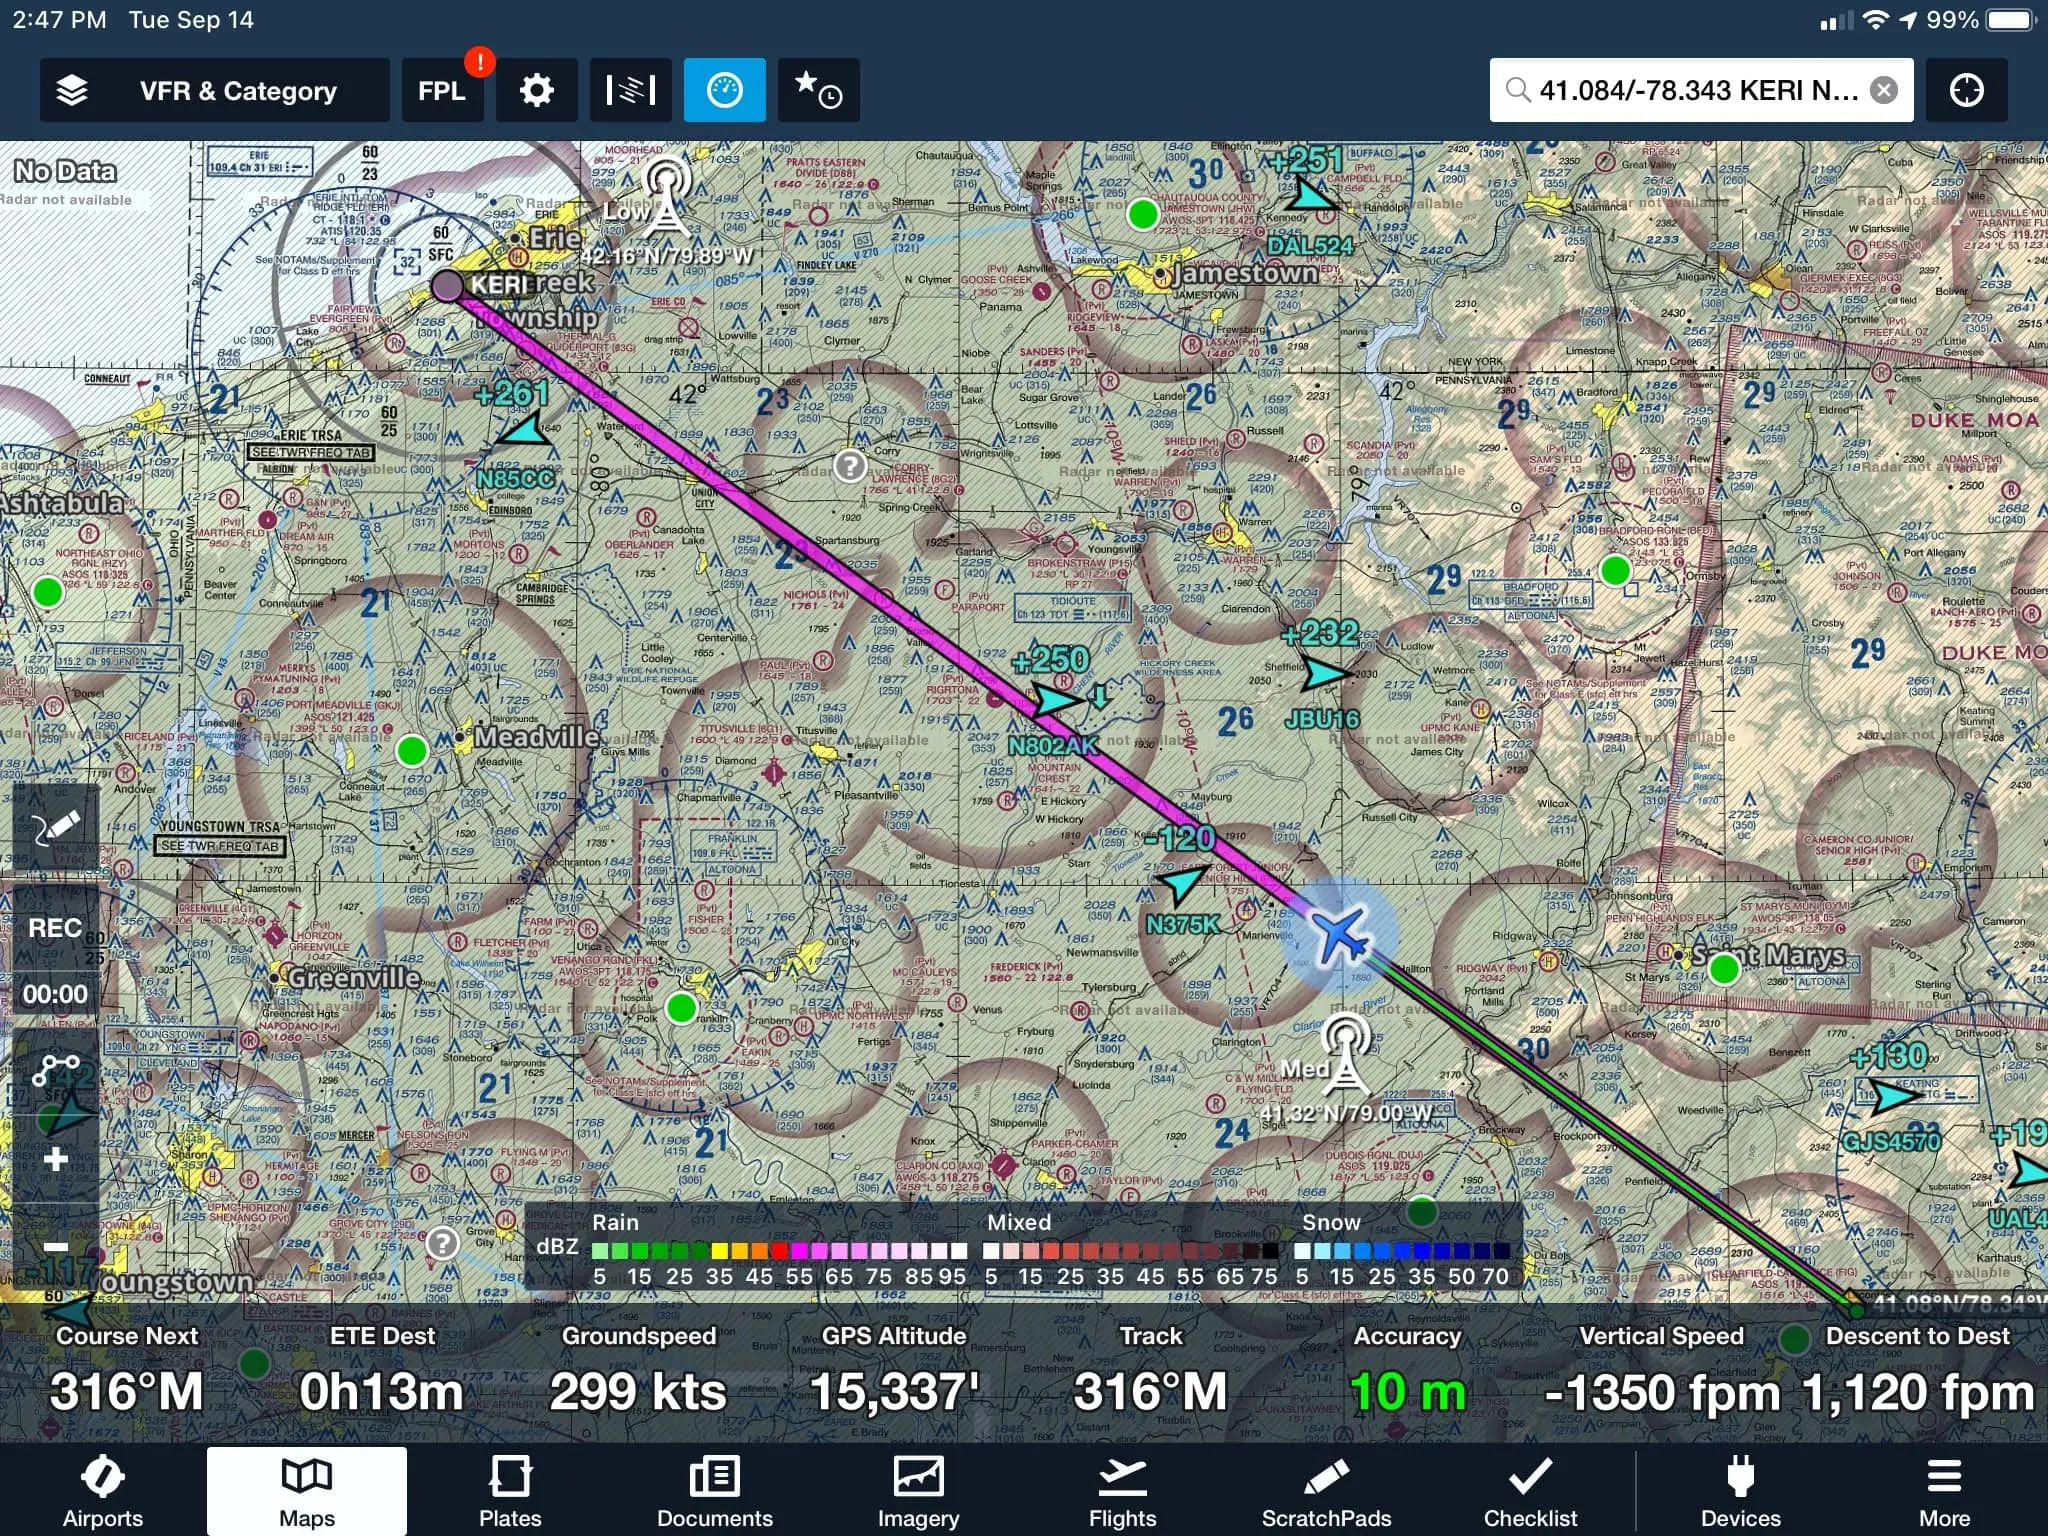 Electronic Foreflight charting software shows aerial flight information such as course, GPS altitude, and descent to destination alongside a map of northwestern Pennsylvania showing an aviation flight path represented by a pink line.